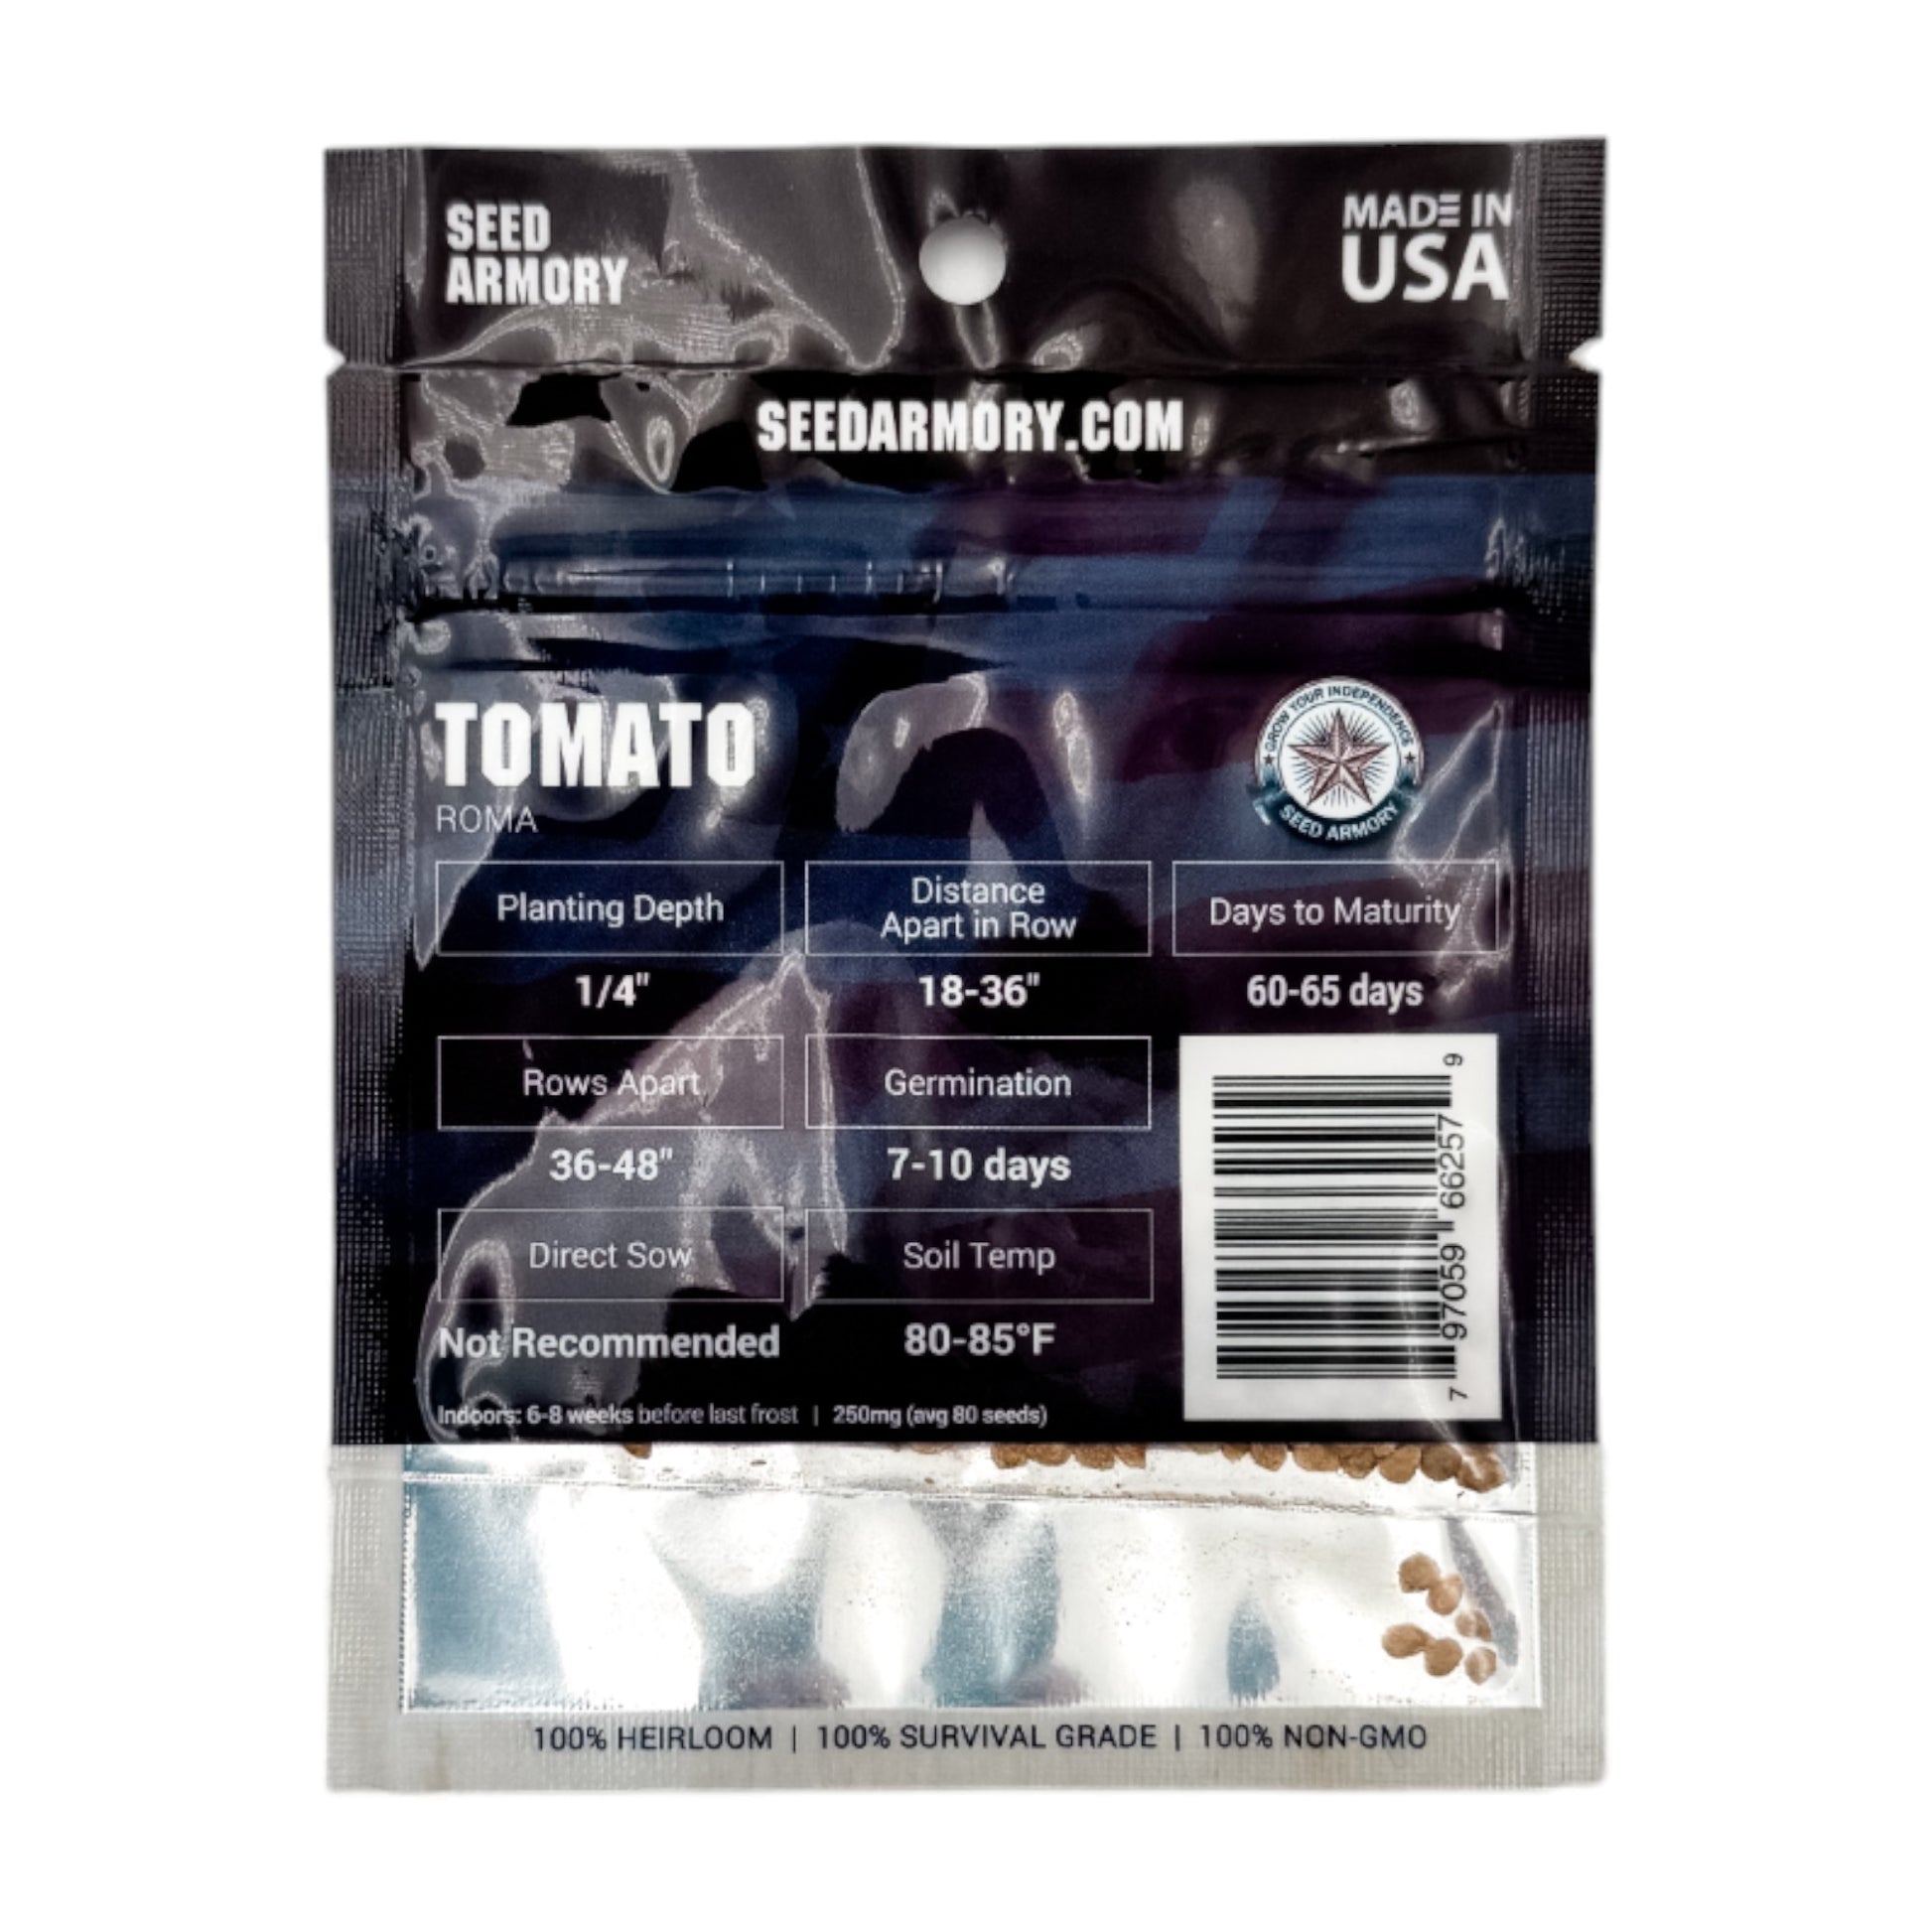 Reverse mylar packet of Roma tomato heirloom seeds with planting instructions